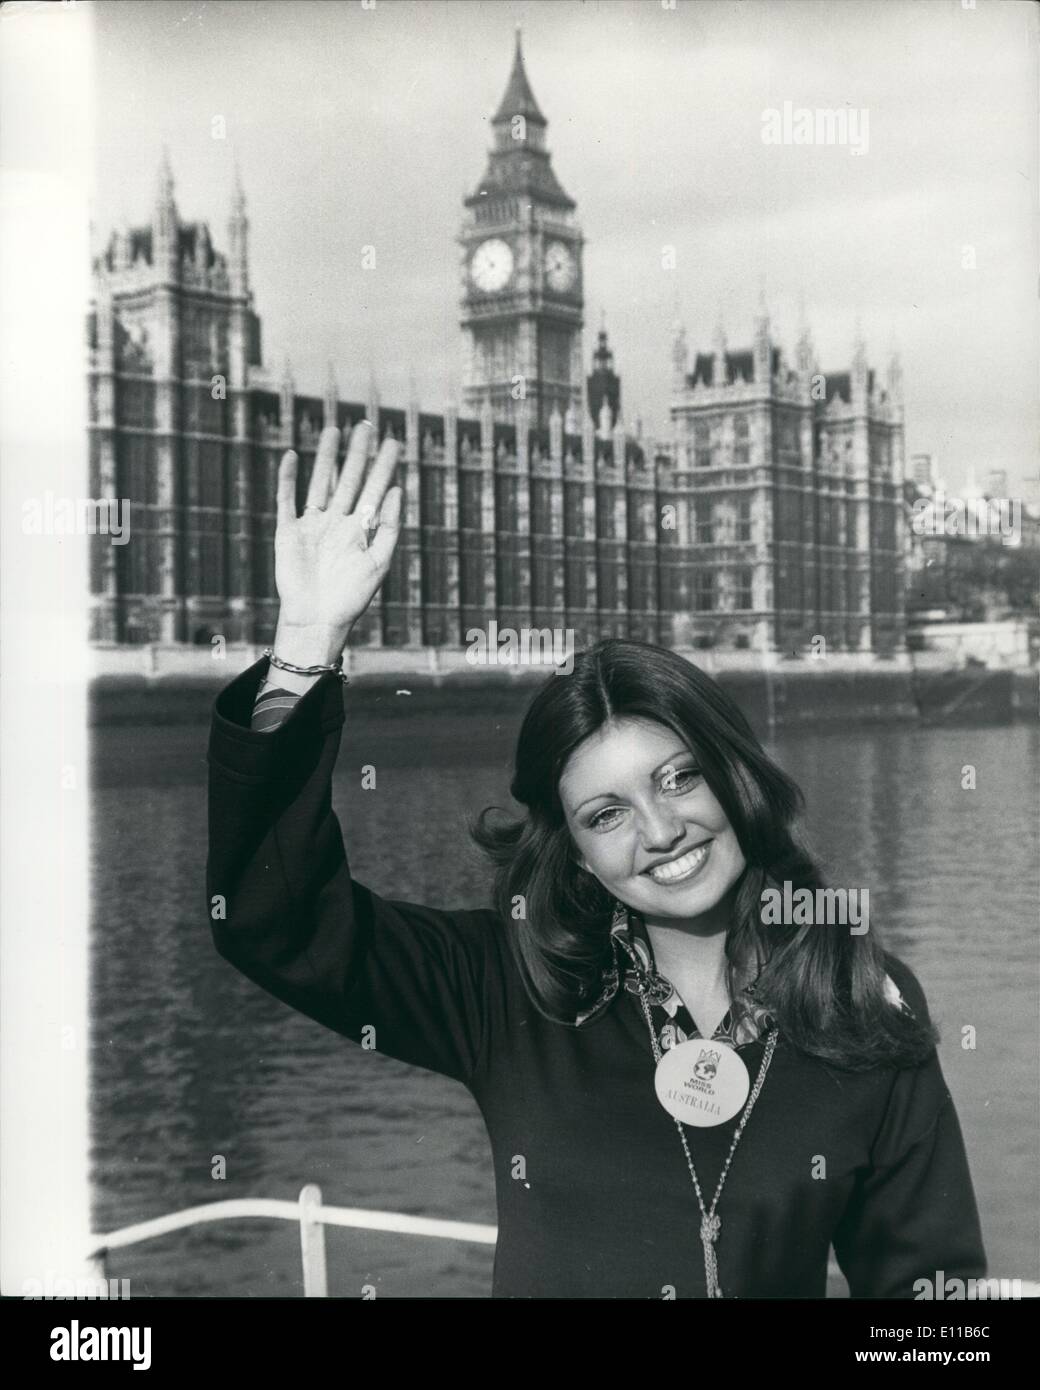 Nov. 11, 1976 - ''Miss World's'' Take a trip on the Thames: Contestants for the 'Miss World' contestant which takes place at the Royal Albert Hall, on November 18th. took a trip today on the river Thames, aboard the Father Thames', pleasure boar. Photo shows Miss Australia, 19 year old Karen Jo ini gives a wave showing the Houses of Parliament in the background. Stock Photo